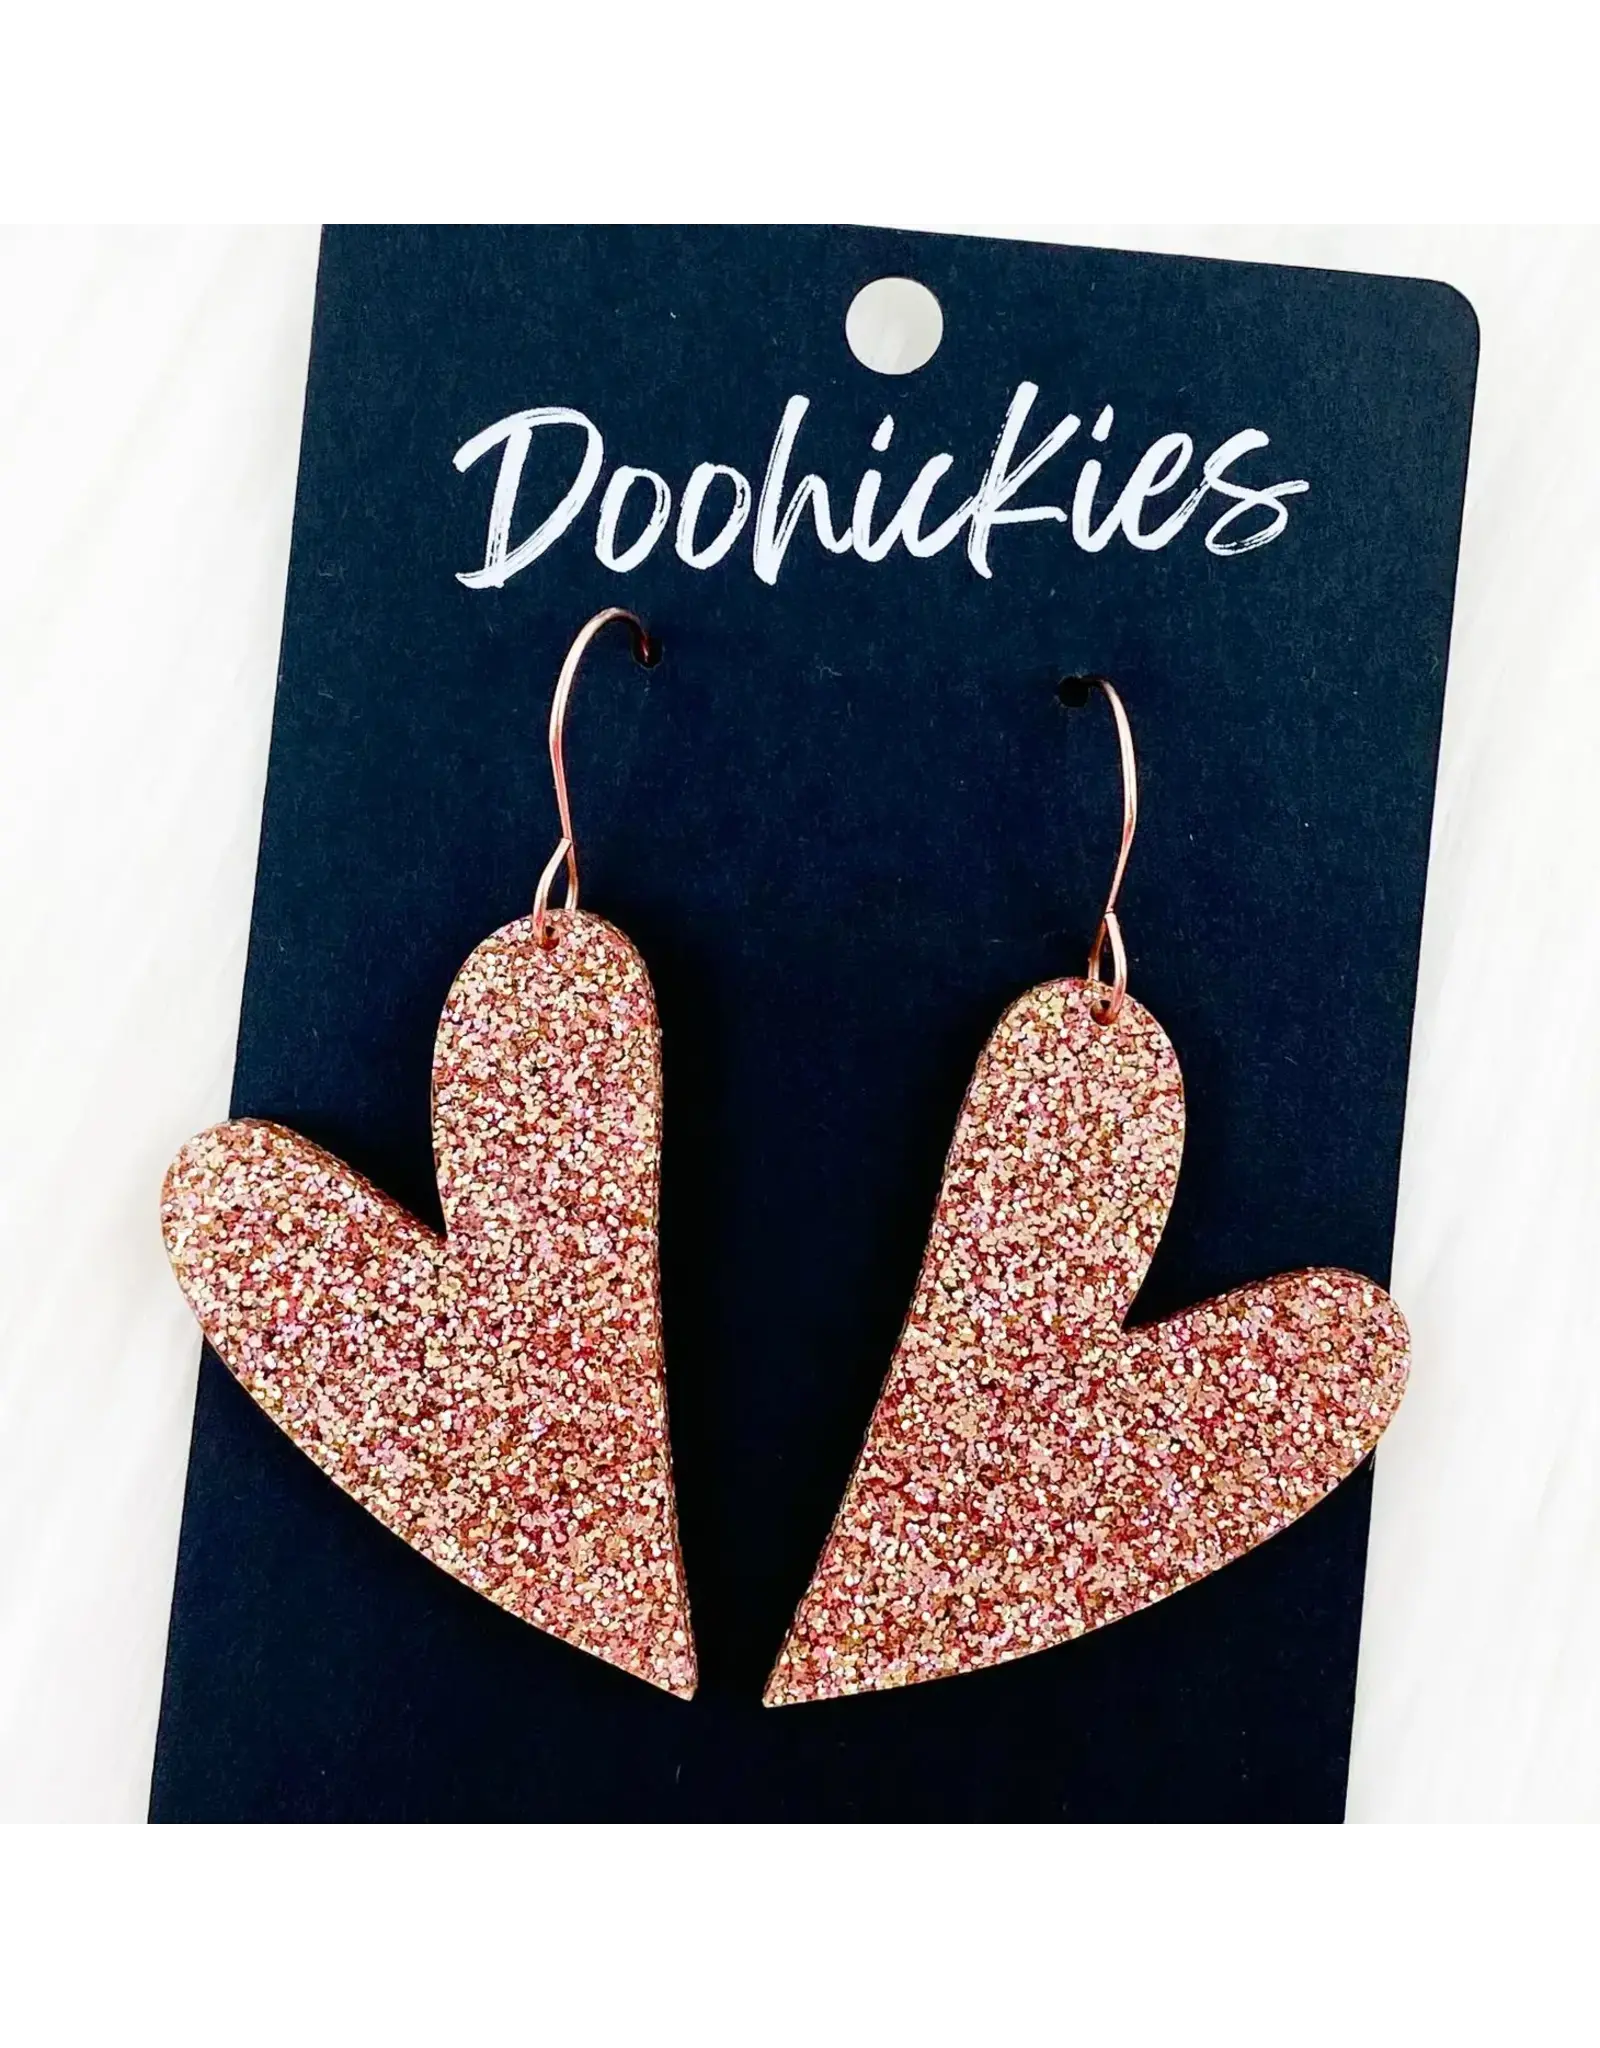 Doohickies/So. Charm Trade Rose Gold Glitter Leaning Hearts Acrylic Earrings